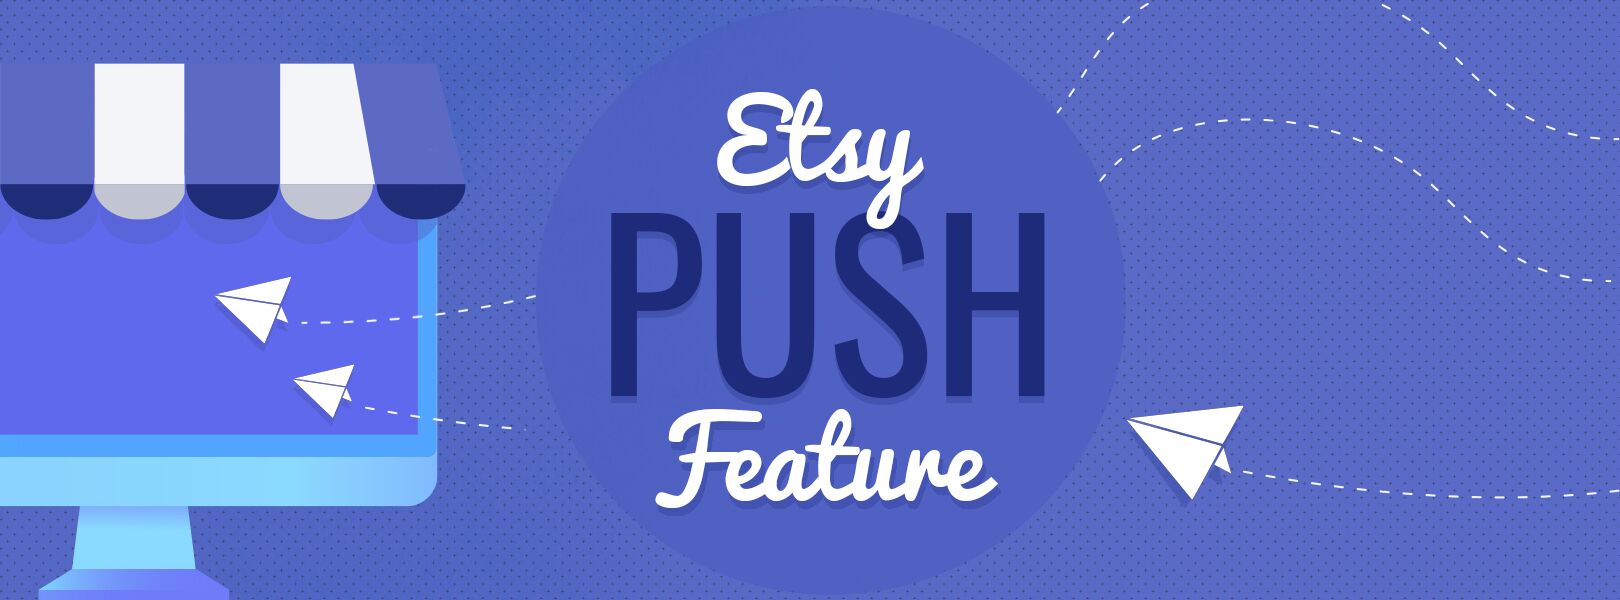 Etsy Just Got a Whole Lot Easier